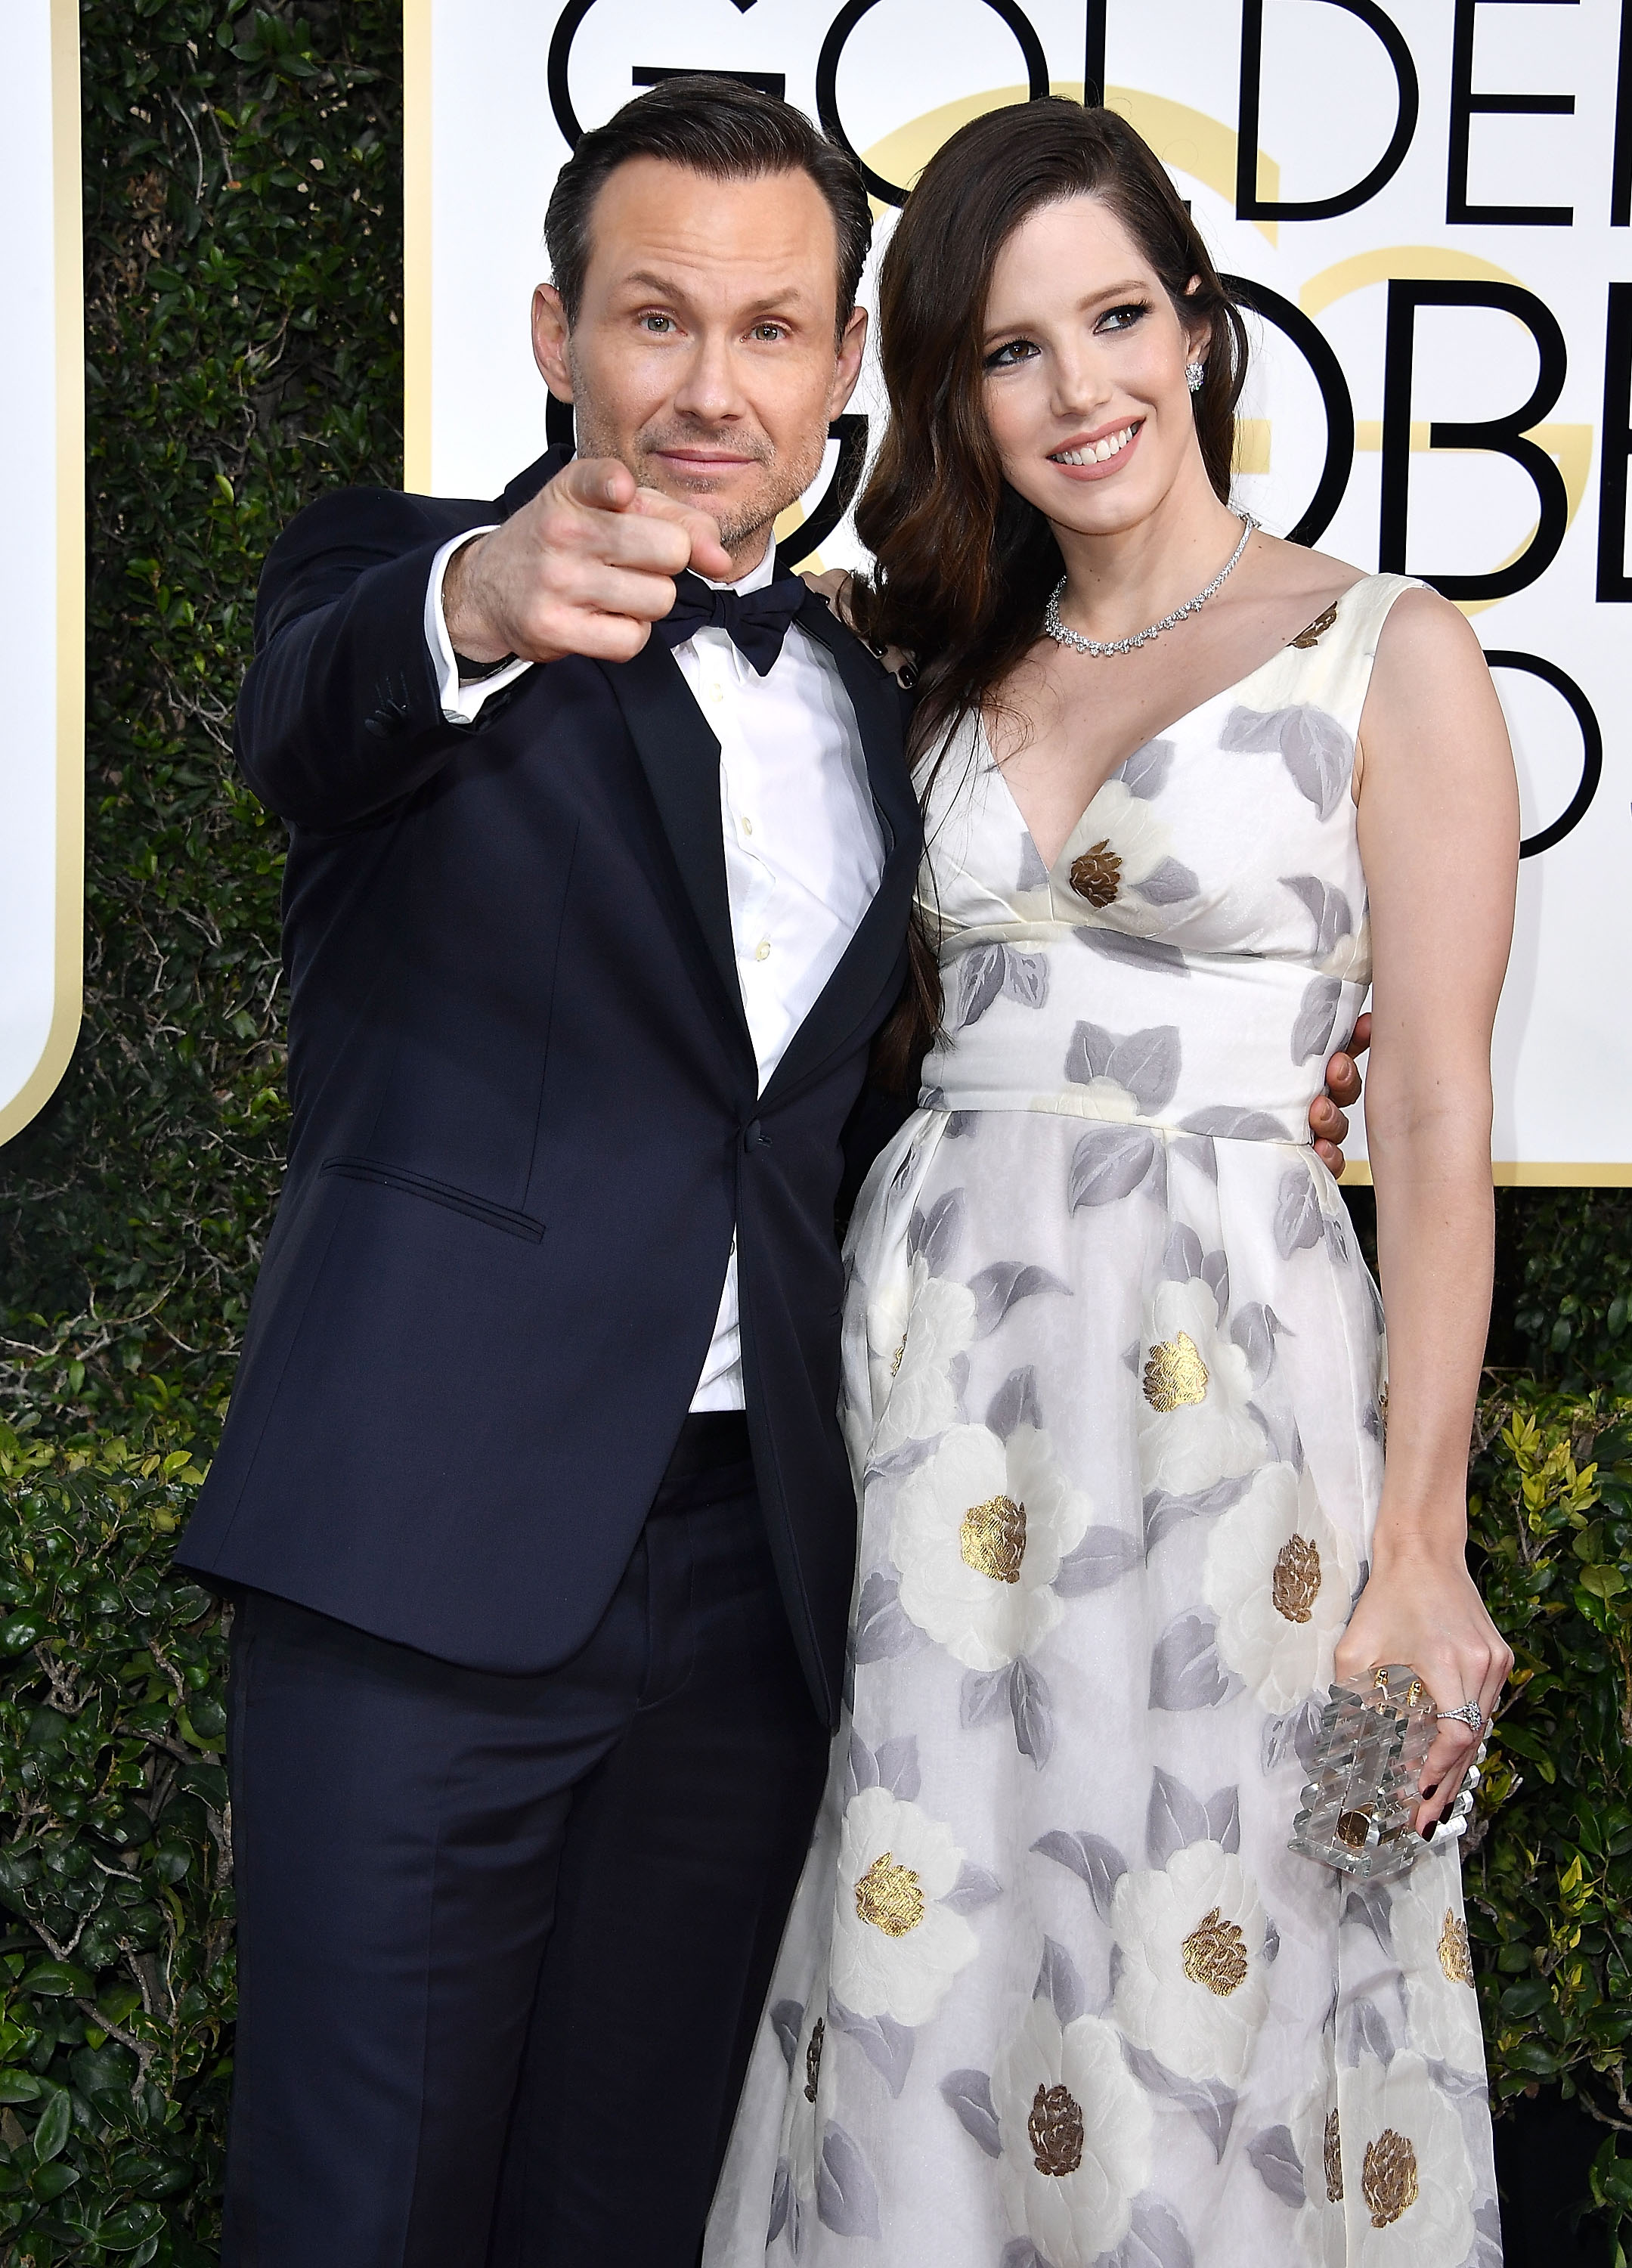 Christian Slater and Brittany Lopez arrive at the 74th Annual Golden Globe Awards at The Beverly Hilton Hotel on January 8, 2017, in Beverly Hills, California